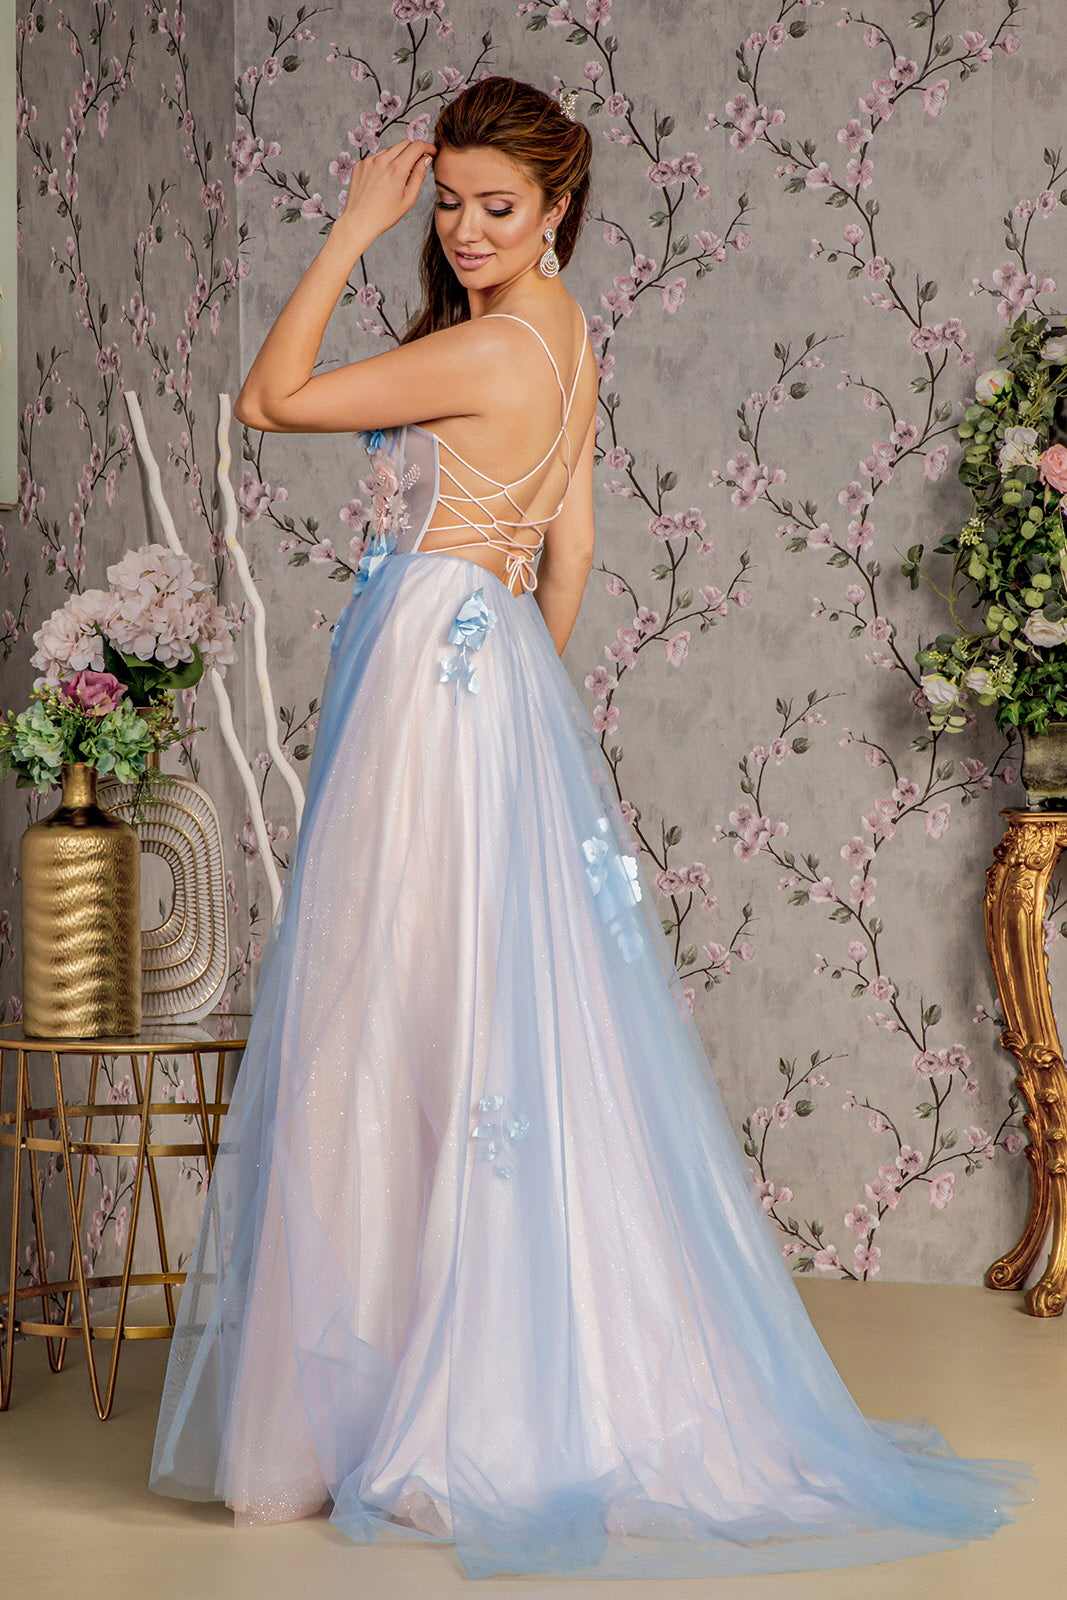 3D Floral Sleeveless A-line Slit Gown by GLS Gloria GL3250